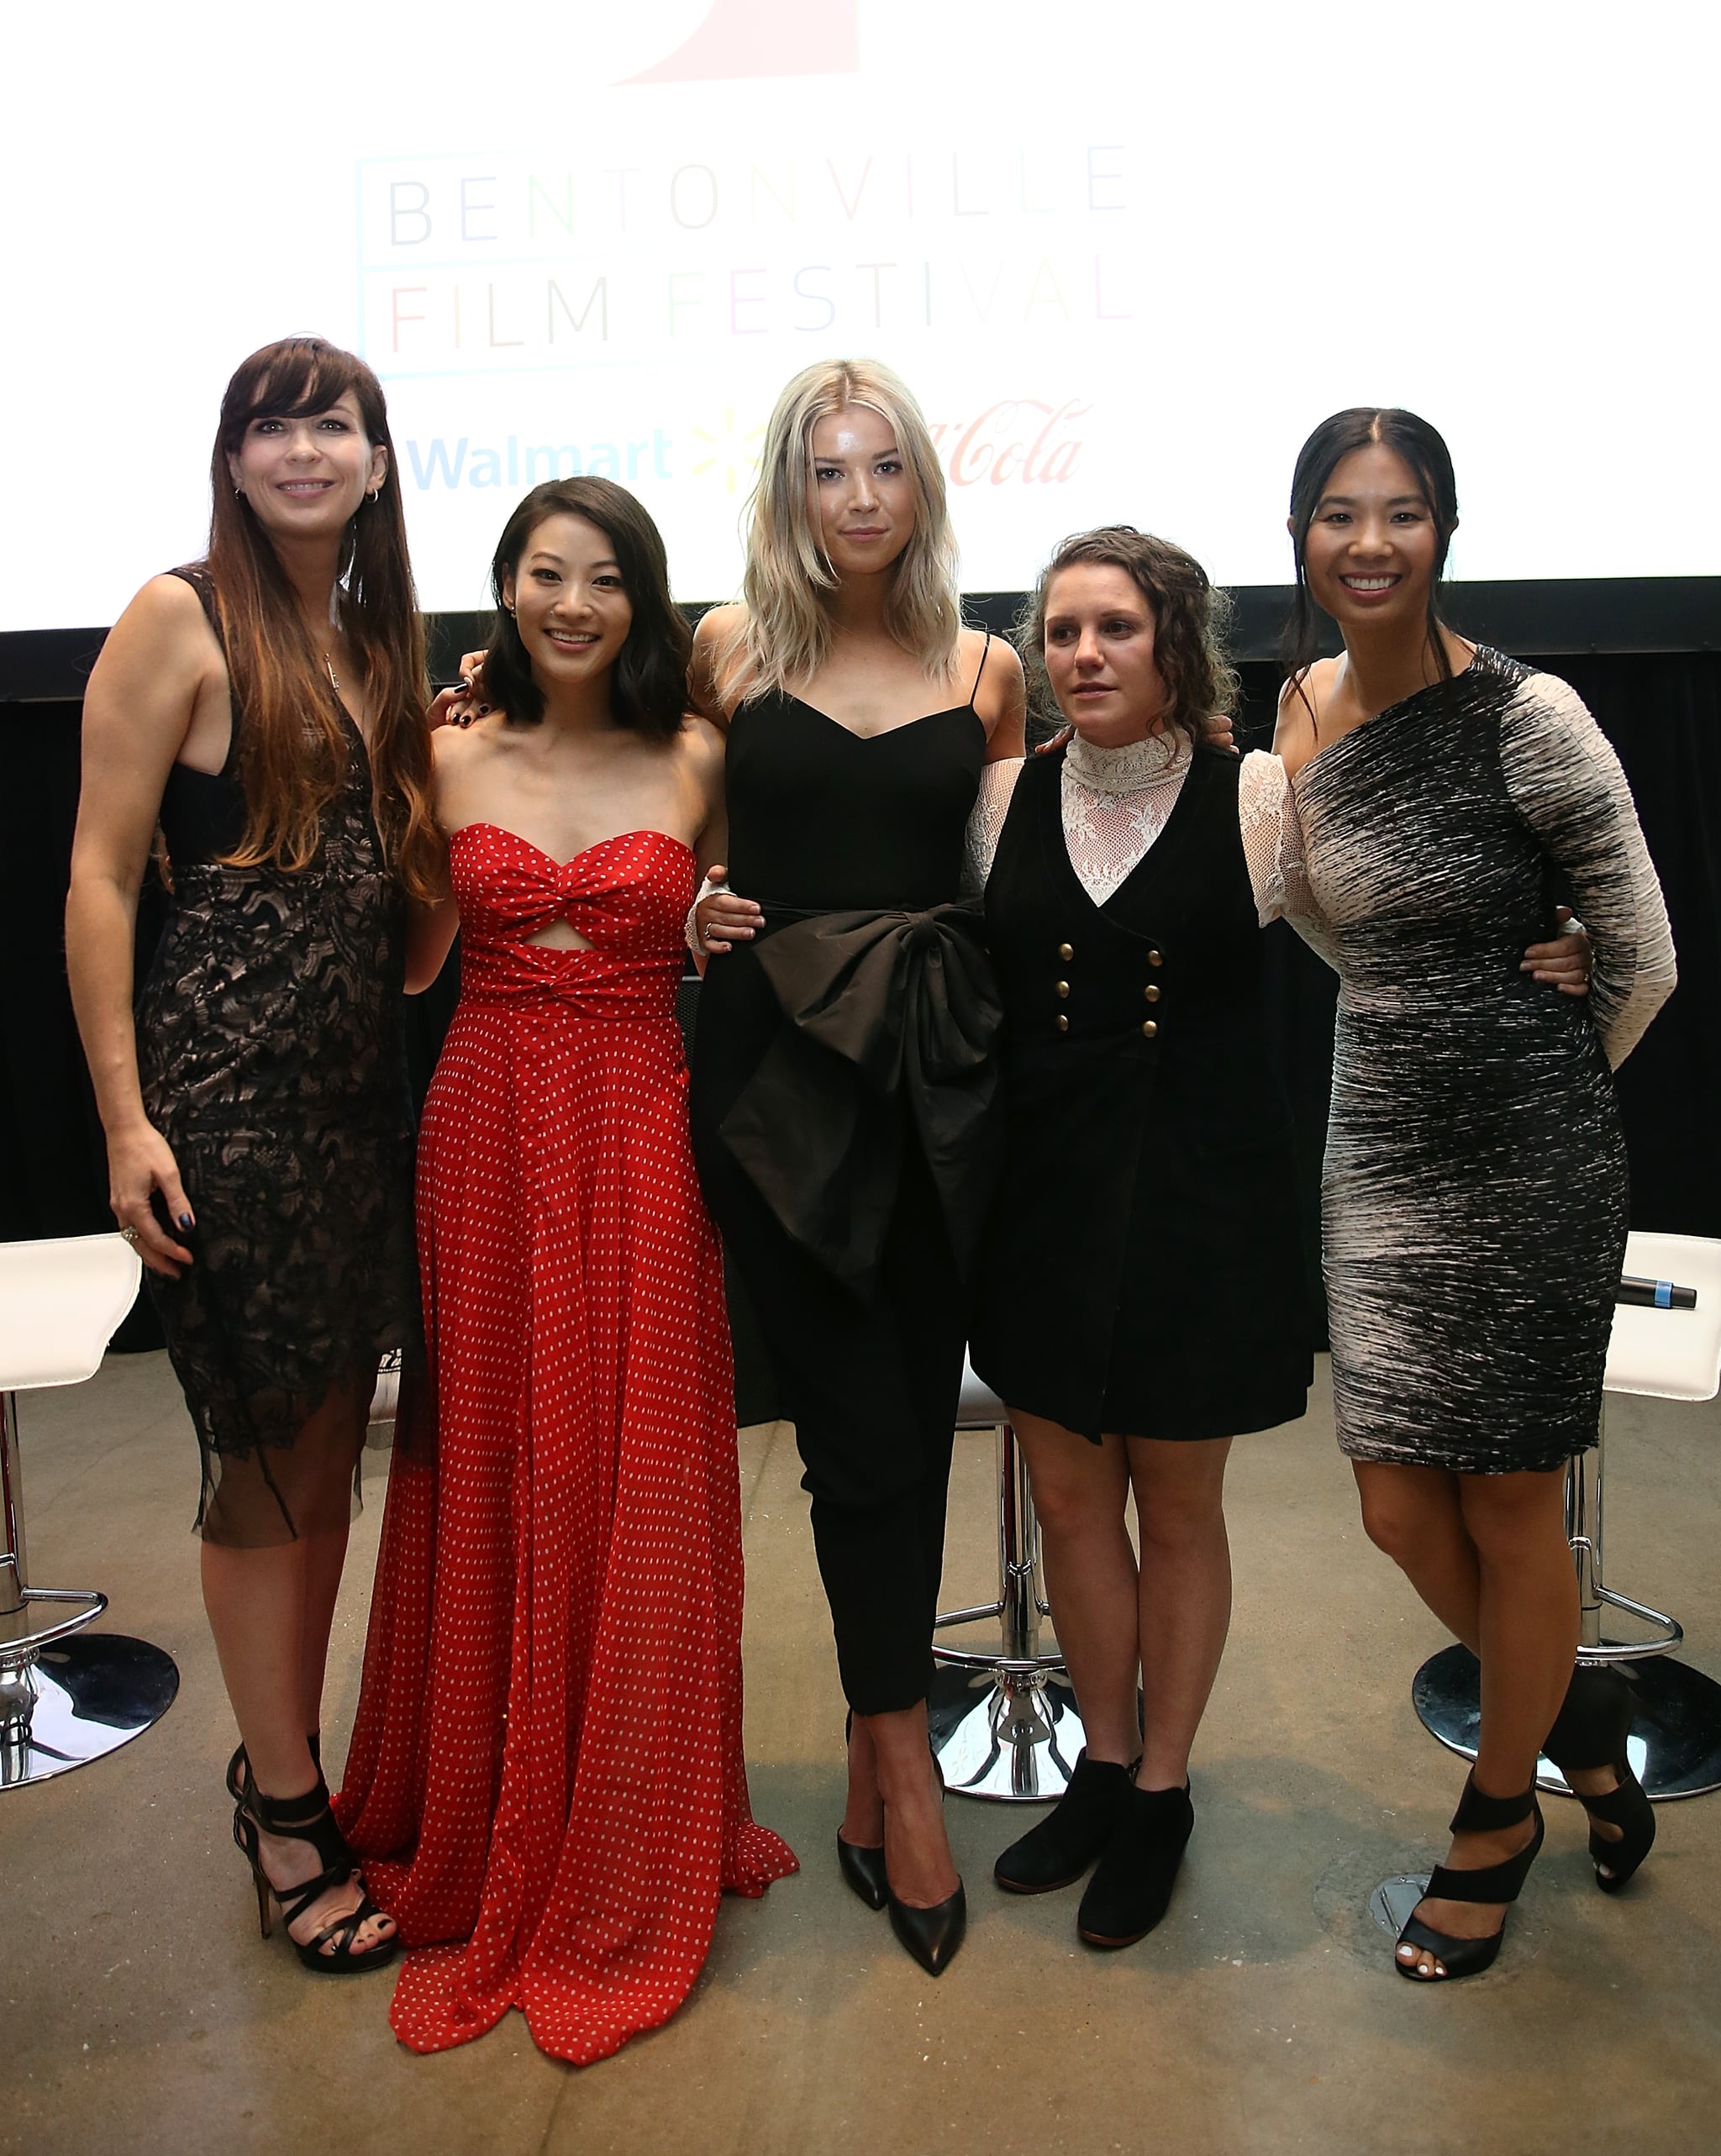 BENTONVILLE, AR - MAY 01:  (L-R) Elissa Down, Arden Cho, Meghan Rienks, Liz Destro, and Marilyn Fu attend The honour List premiere at the 4th Annual Bentonville Film Festival on May 1, 2018 in Bentonville, Arkansas.  (Photo by Phillip Faraone/Getty Images for Bentonville Film Festival)